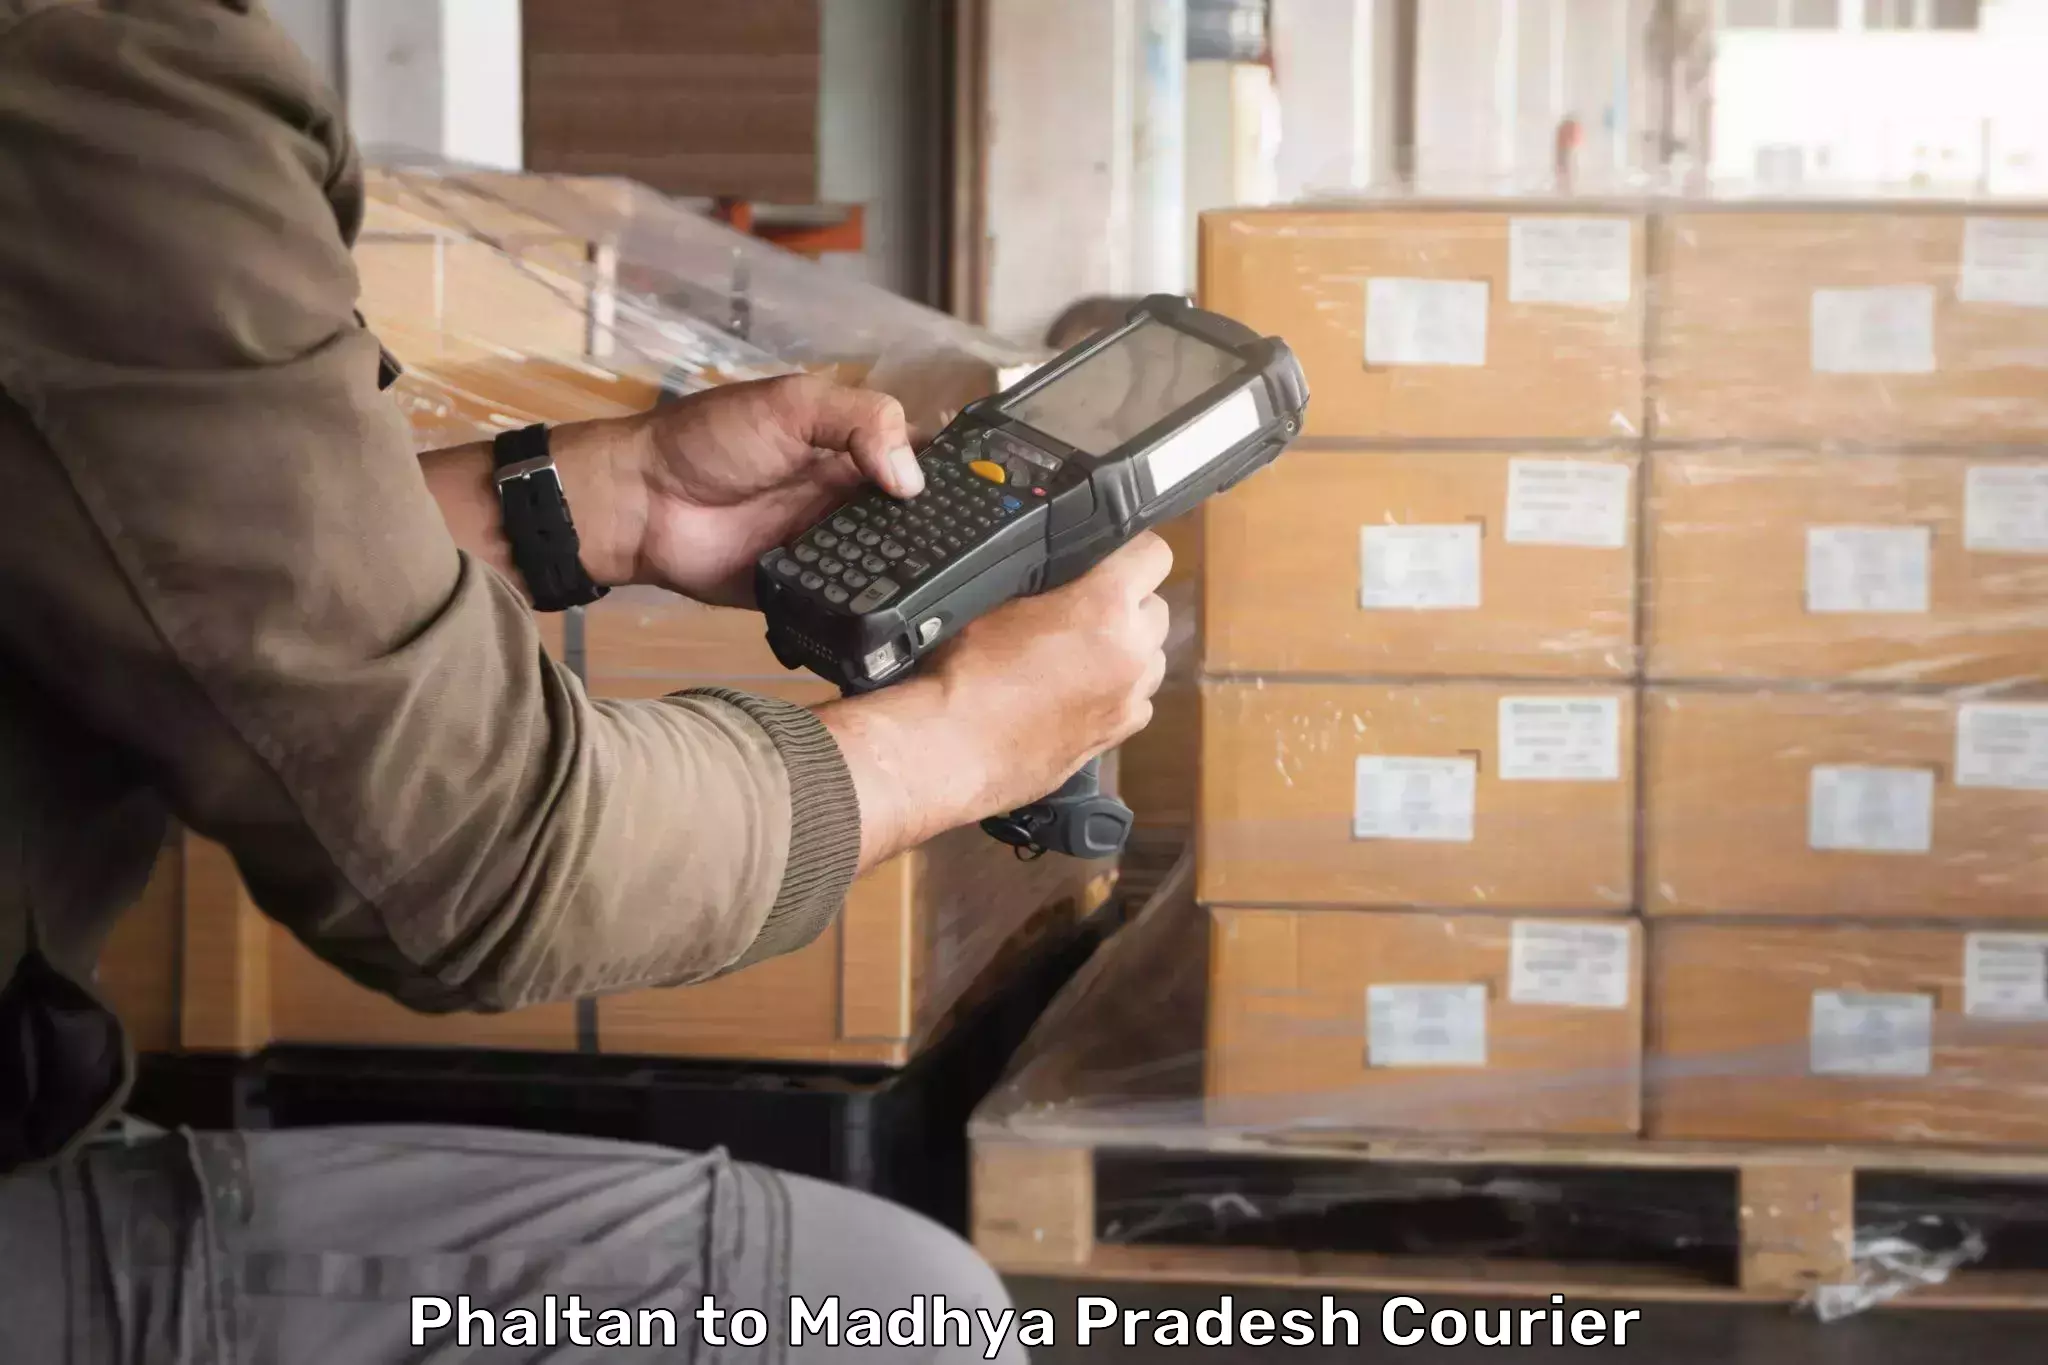 Ground shipping in Phaltan to IIIT Bhopal